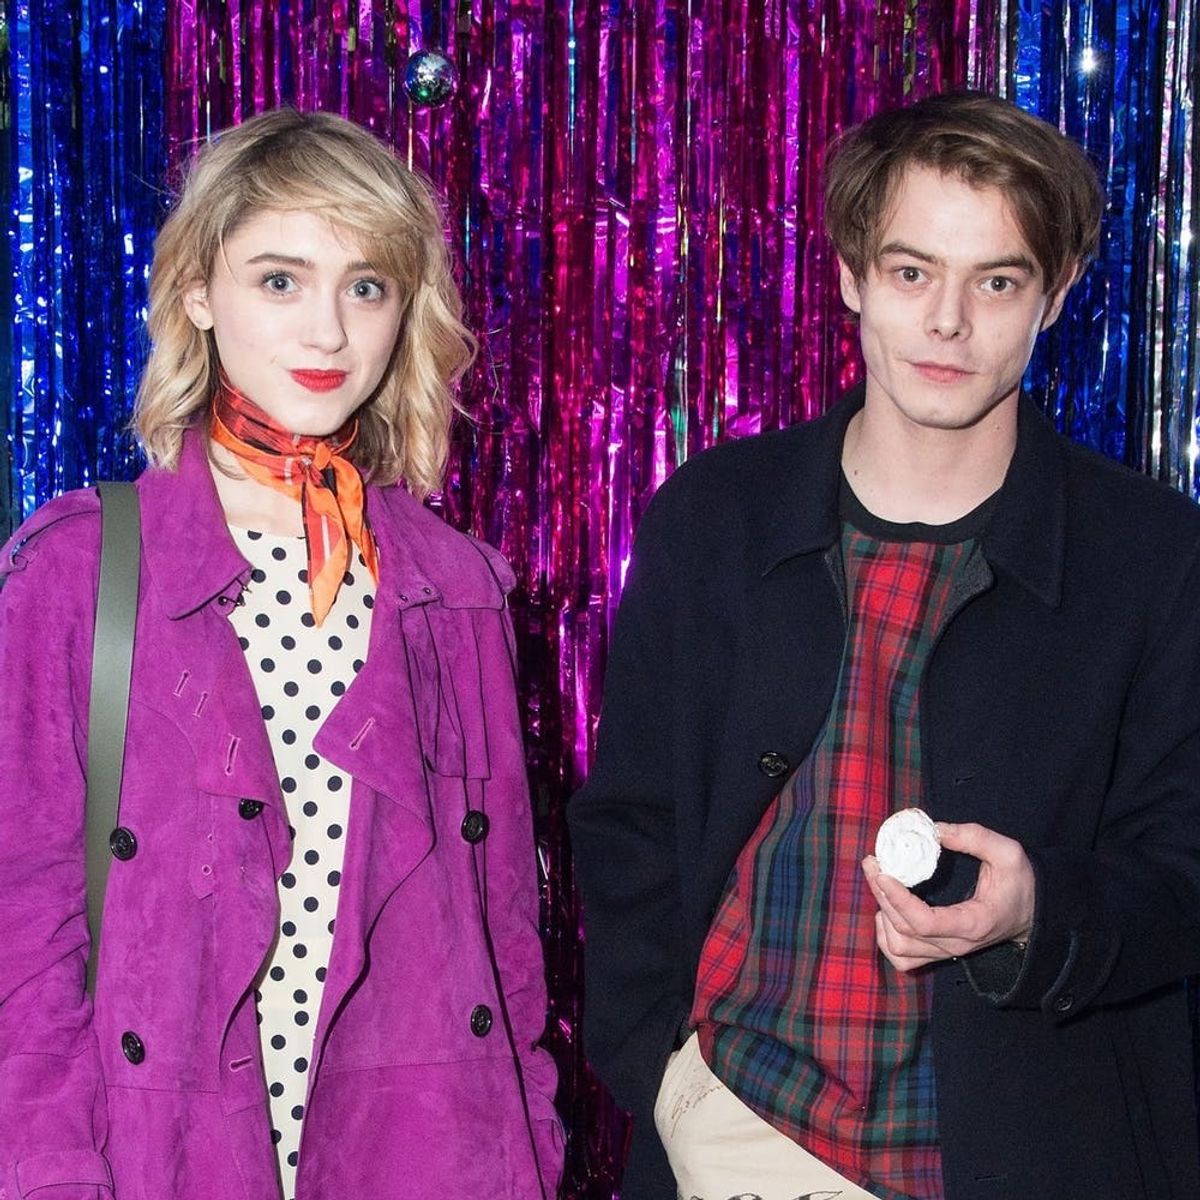 Stranger Things’ Natalia Dyer and Charlie Heaton Fuel Romance Rumors at Holiday Event